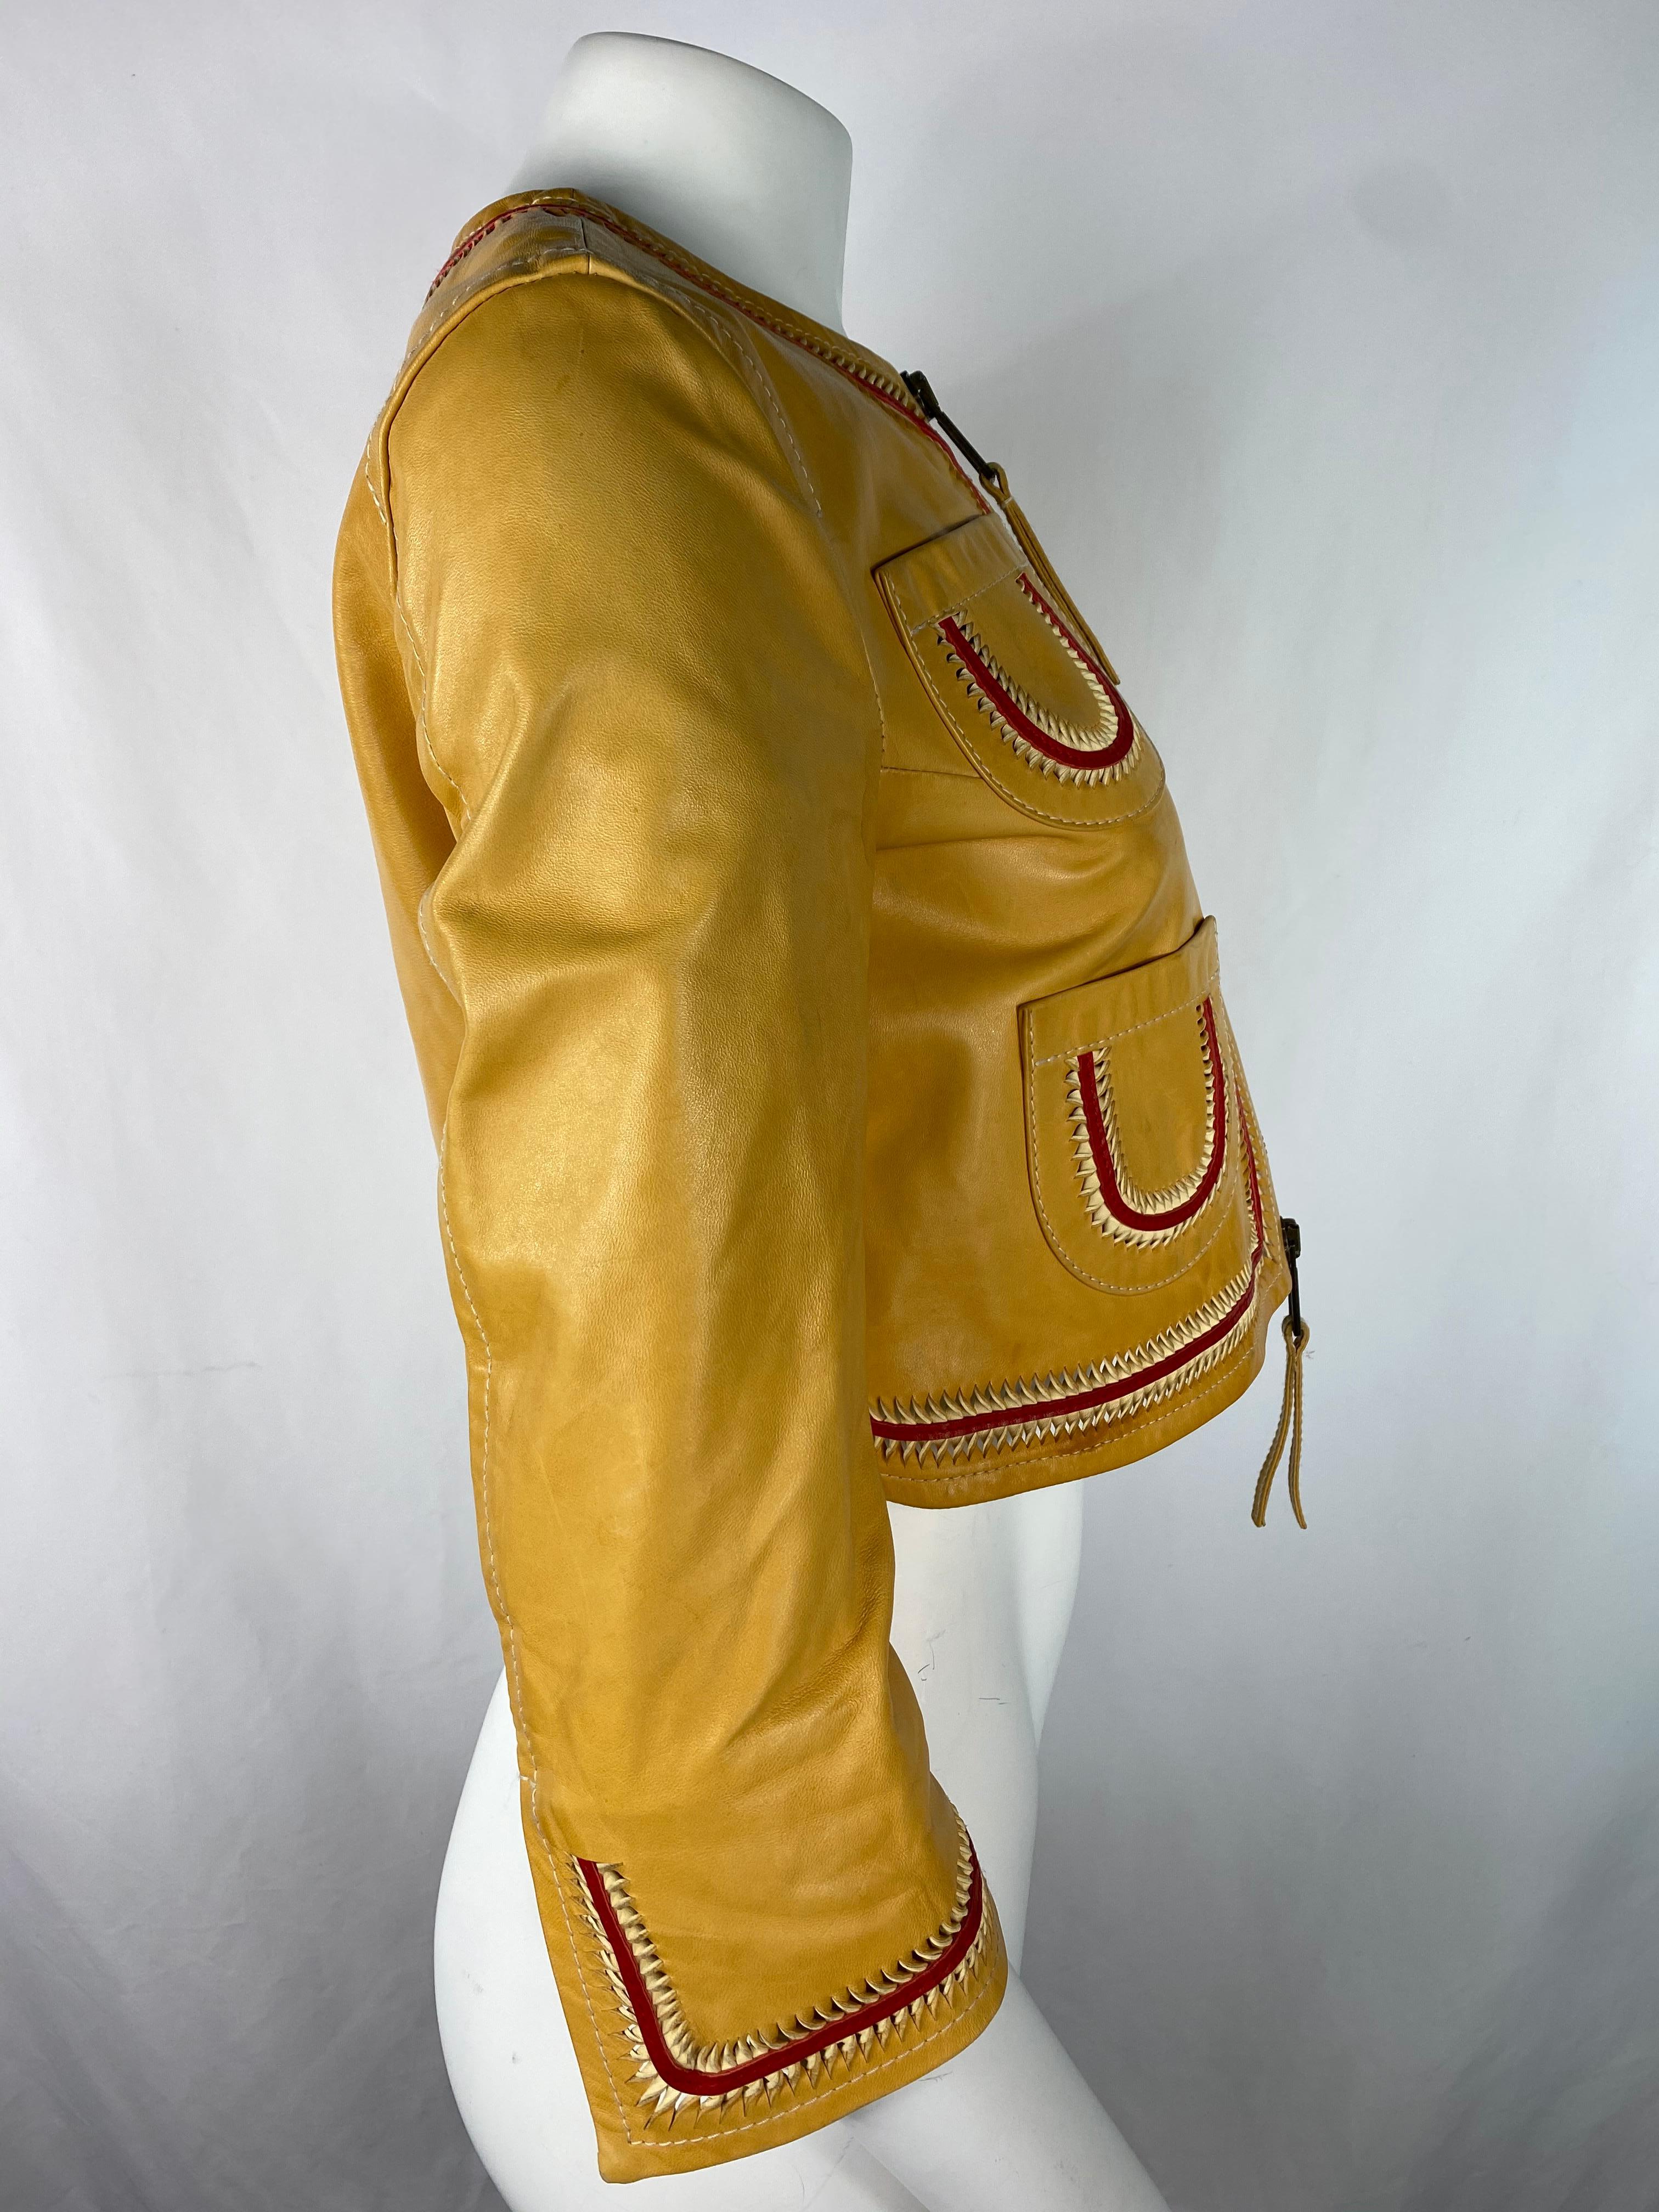 Product details:

Featuring yellow leather jacket with red detail, four front pockets, front zip closure, crew neckline, 3/4 sleeves with slit detail, cropped length. The sleeves measure 18.5 inches long.
Made in Italy.